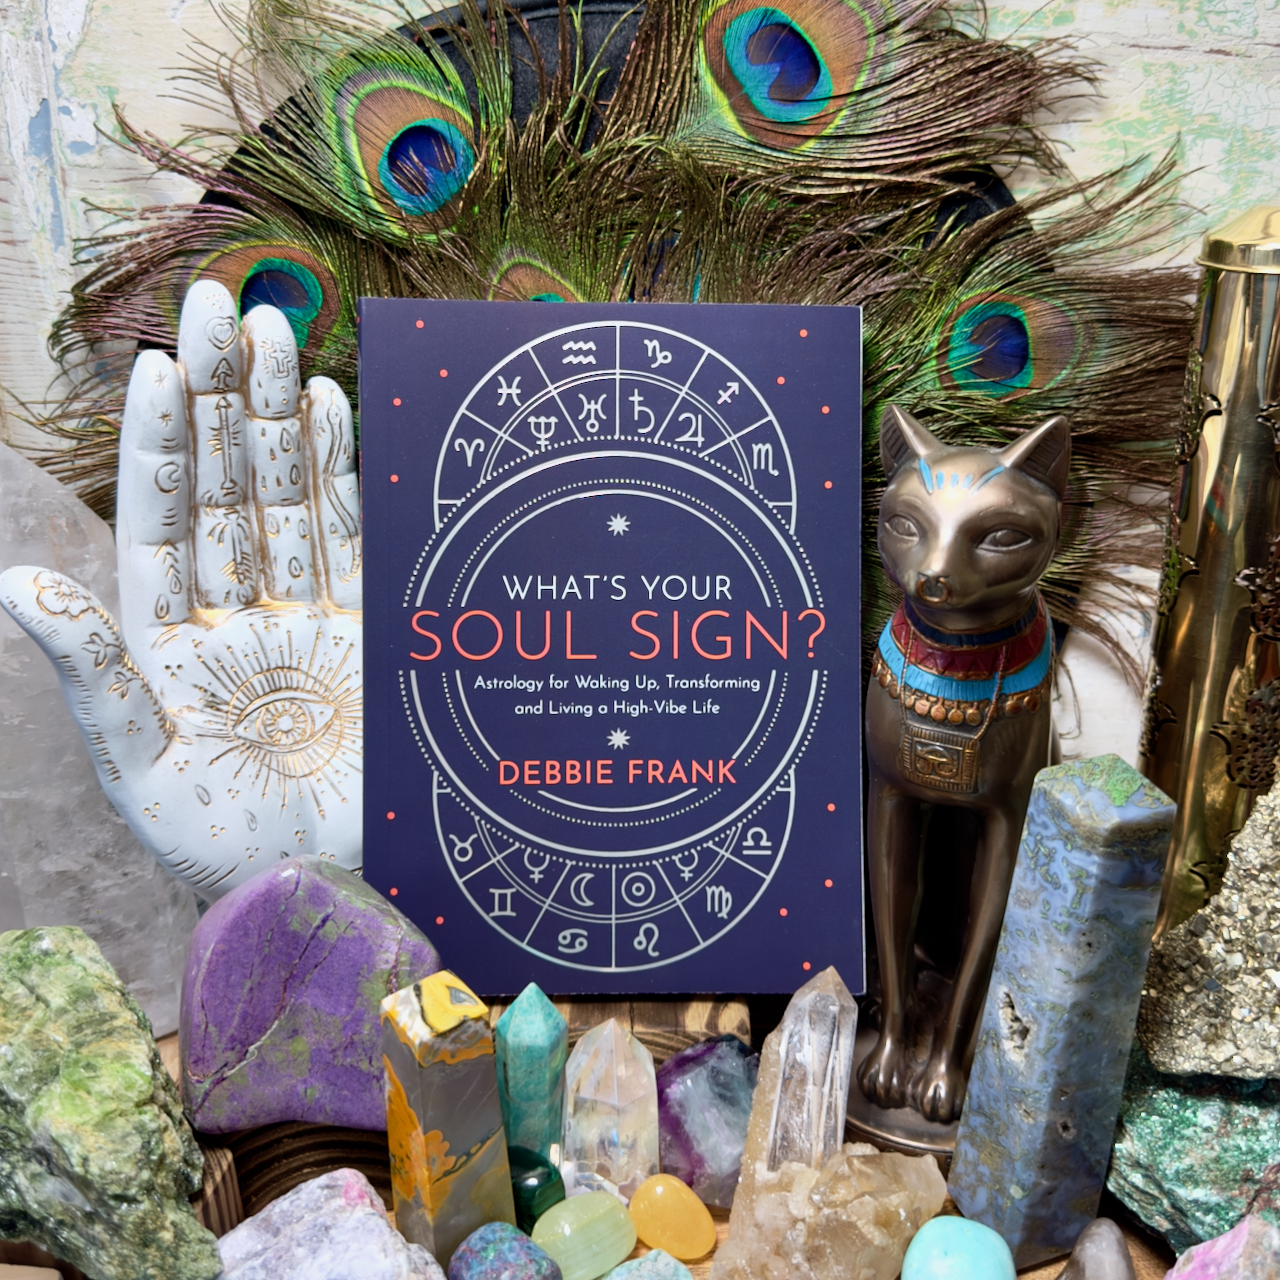 What’s Your Soul Sign?: Astrology for Waking Up, Transforming and Living a High-Vibe Life